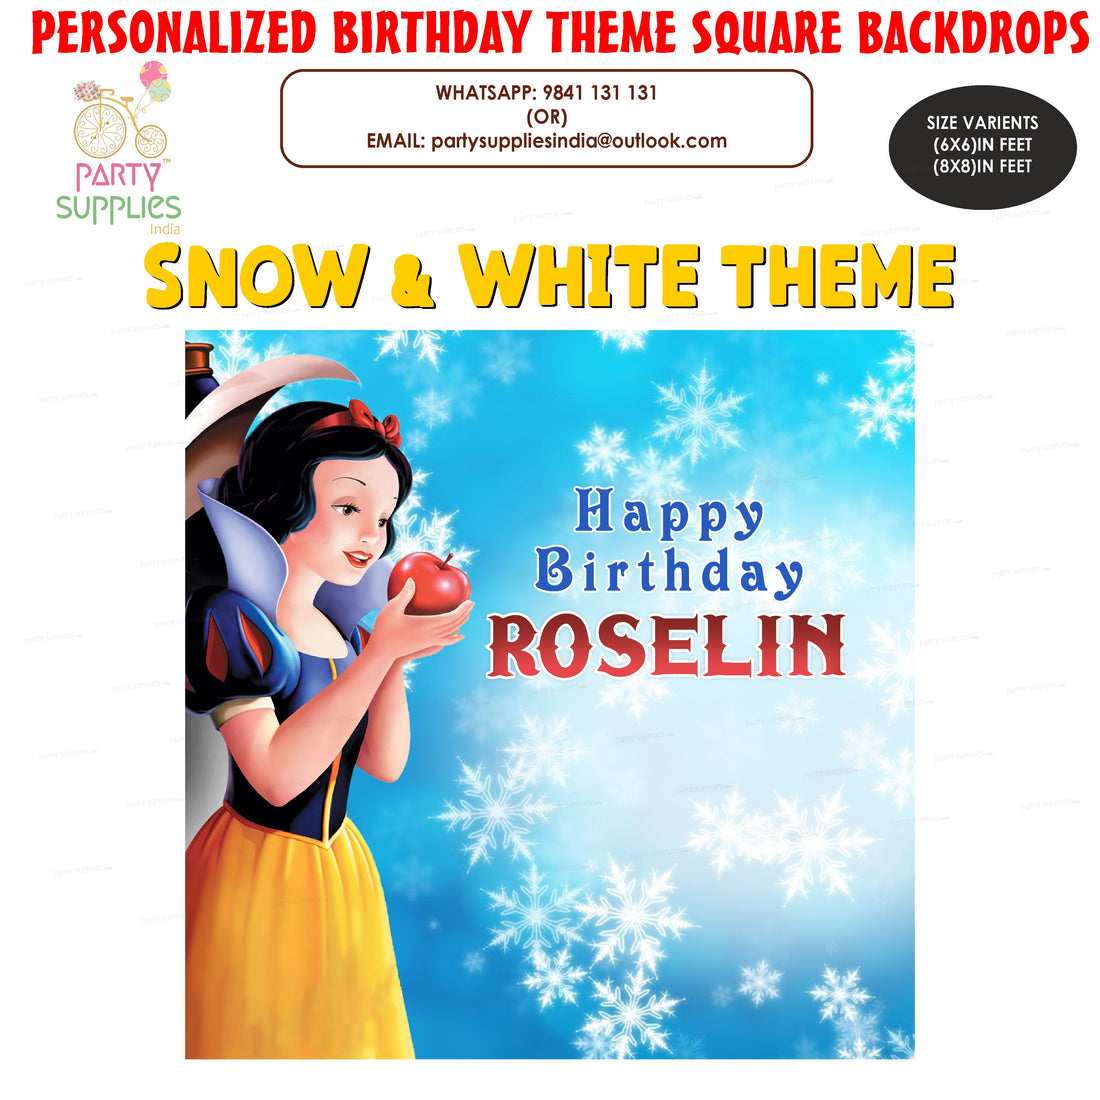 PSI Snow And White Theme Customized Square Backdrop